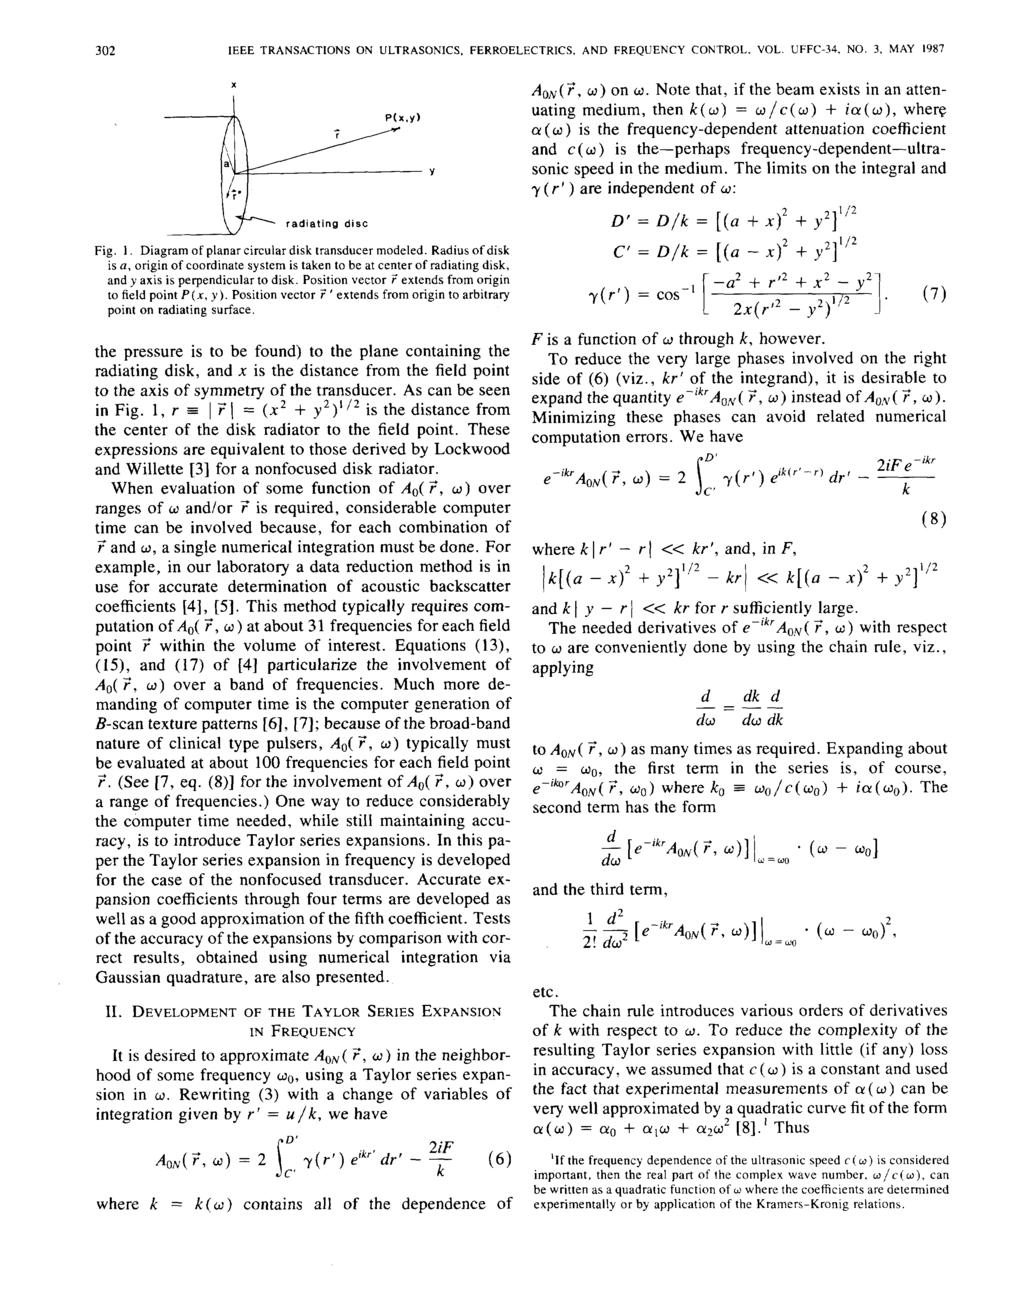 3 IEEE TRANSACTIONS ON ULTRASONICS, FERROELECTRICS, AND FREQUENCY CONTROL, VOL. UFFC-34, NO. 3, MAY 1987 X \ -f- radiating disc Fig. 1. Diagram of planar circular disk transducer modeled.